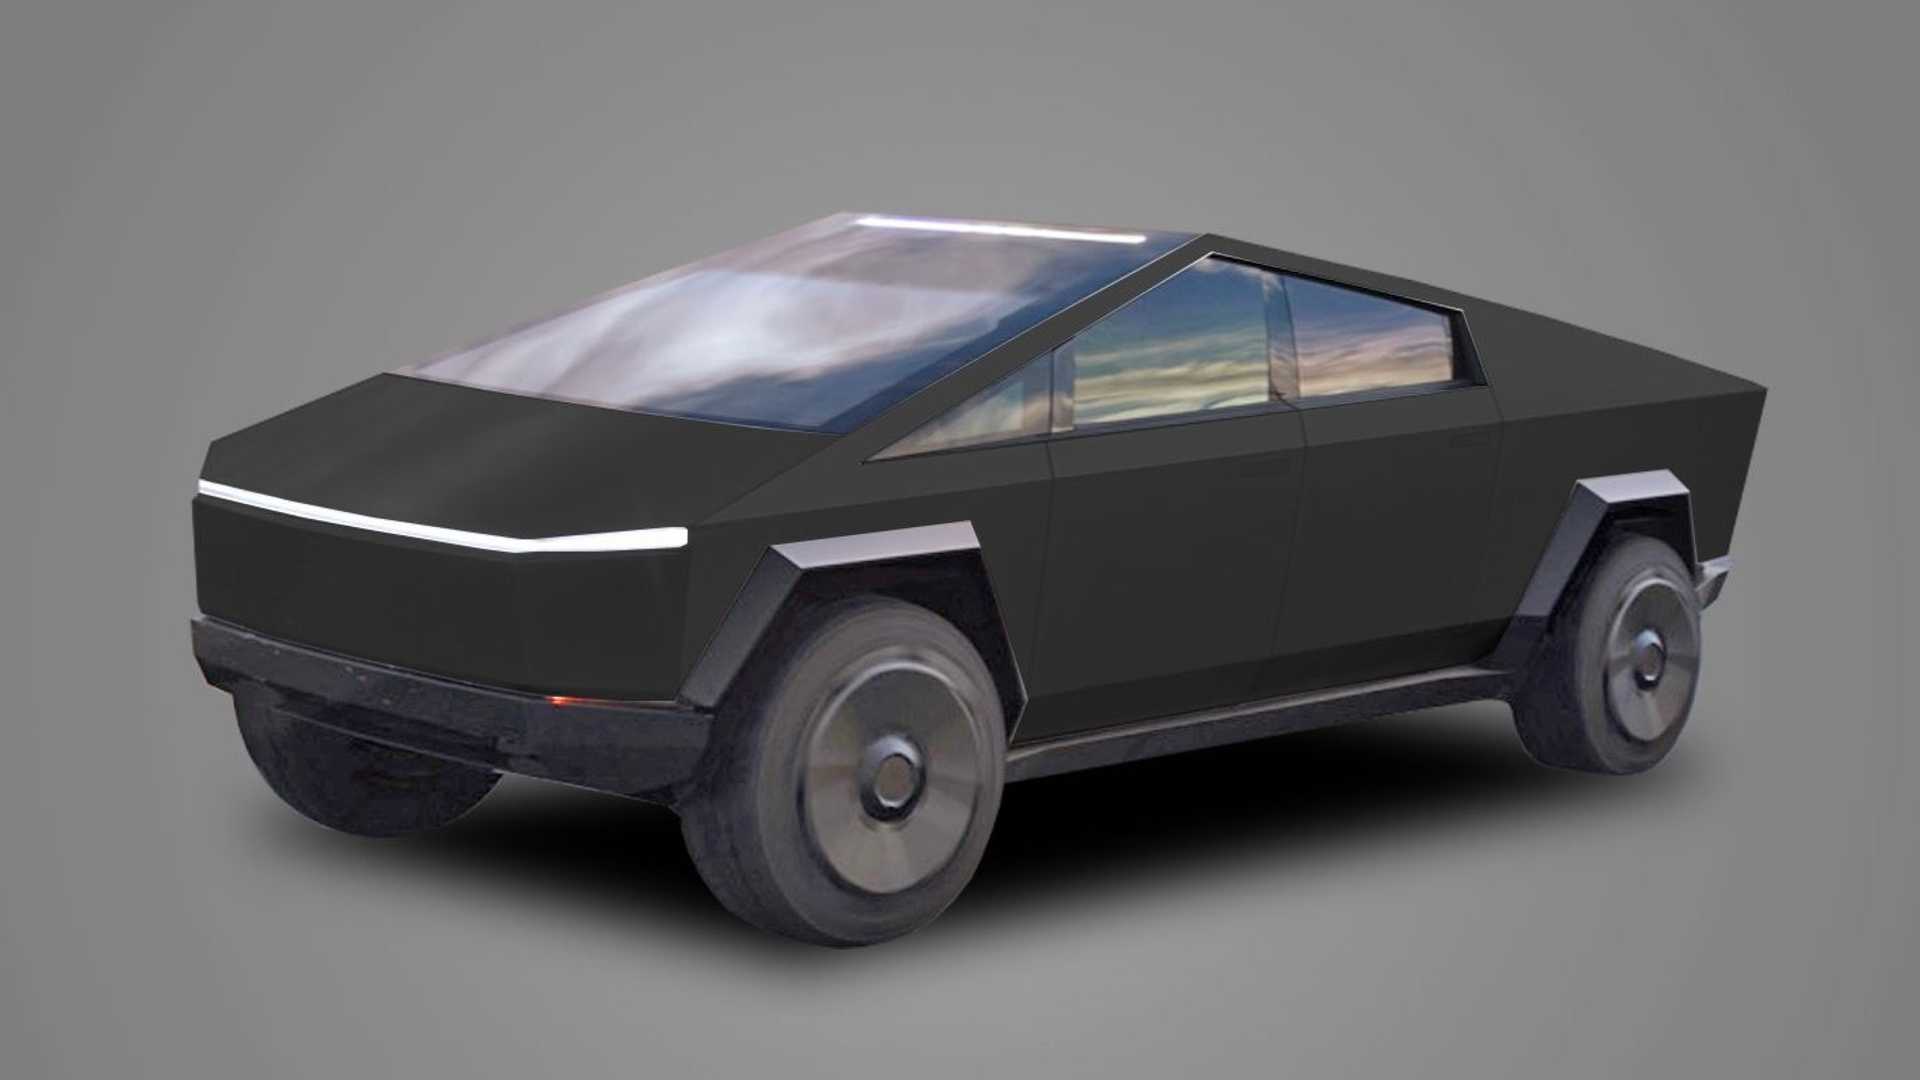 See The Tesla Cybertruck In New Colors, Including Matte Black